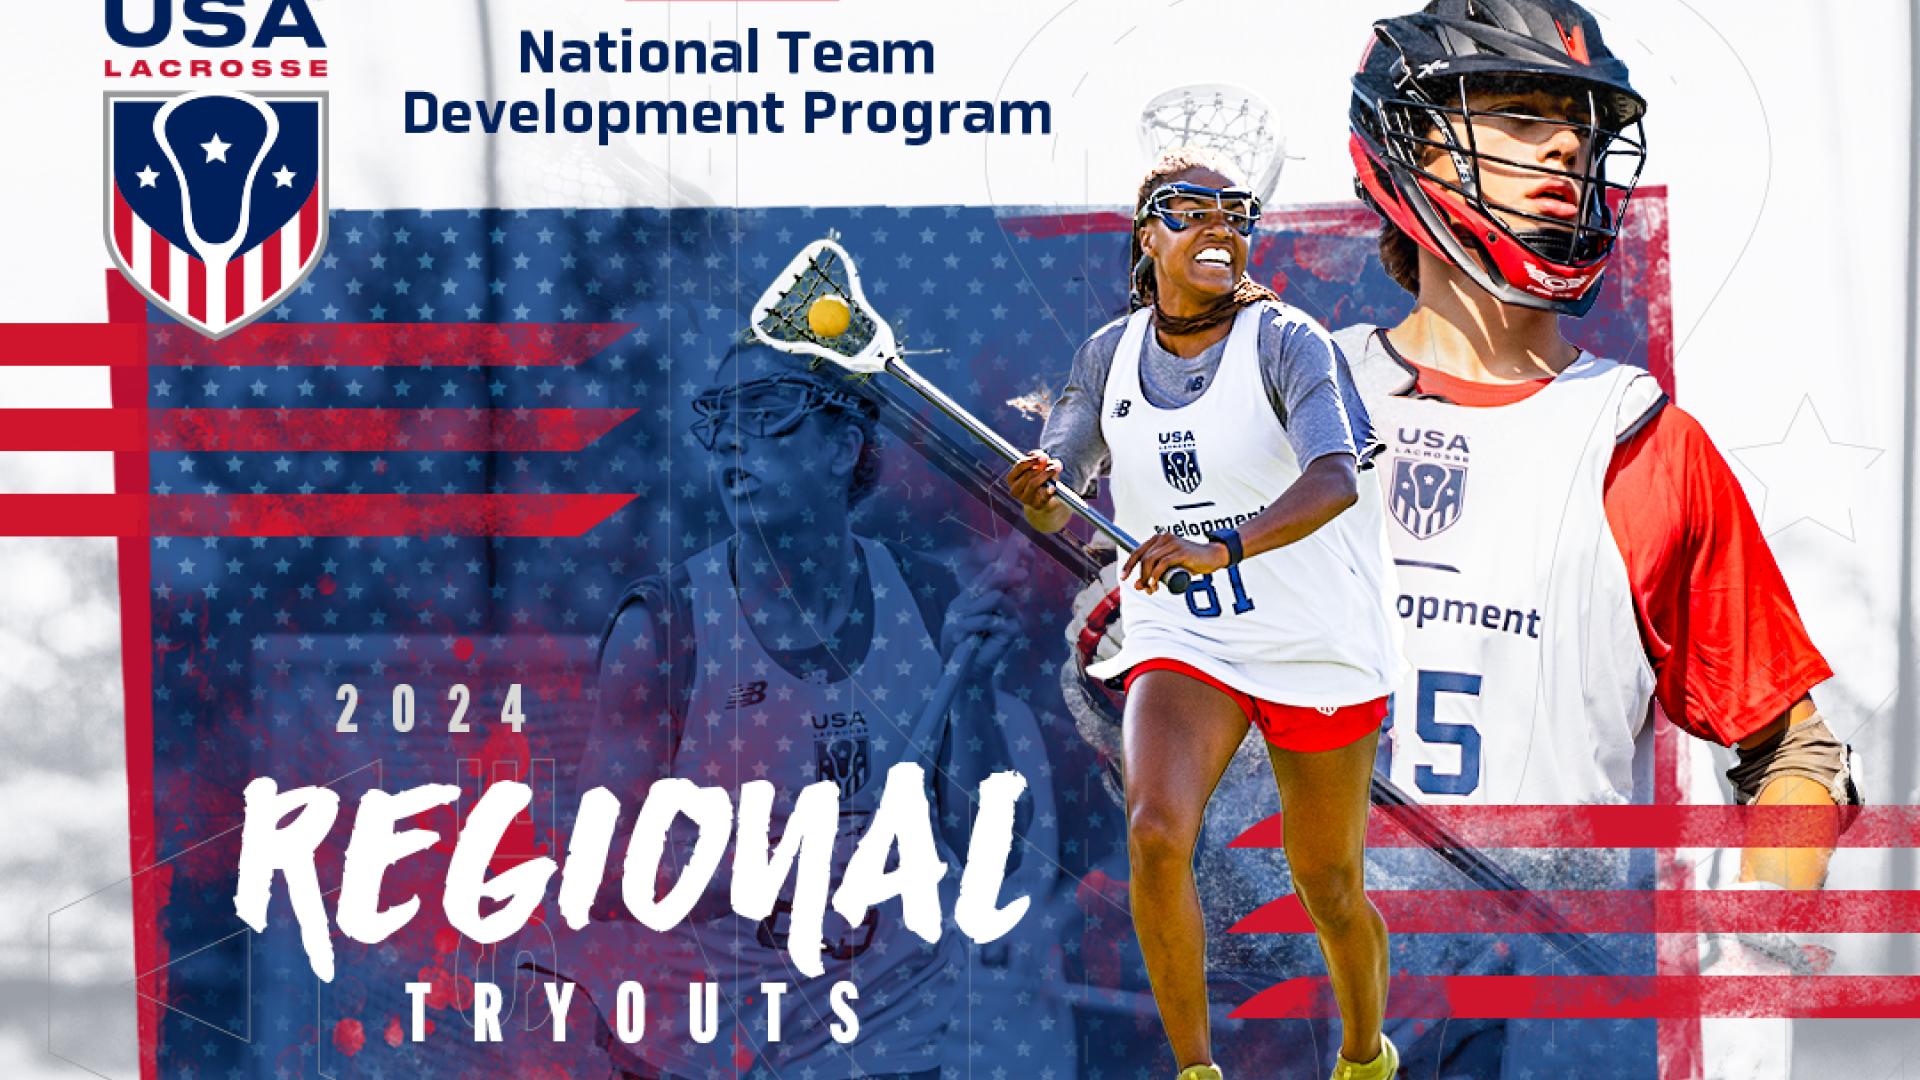 Registration Opens for 2024 USA Lacrosse NTDP Regional Tryouts USA